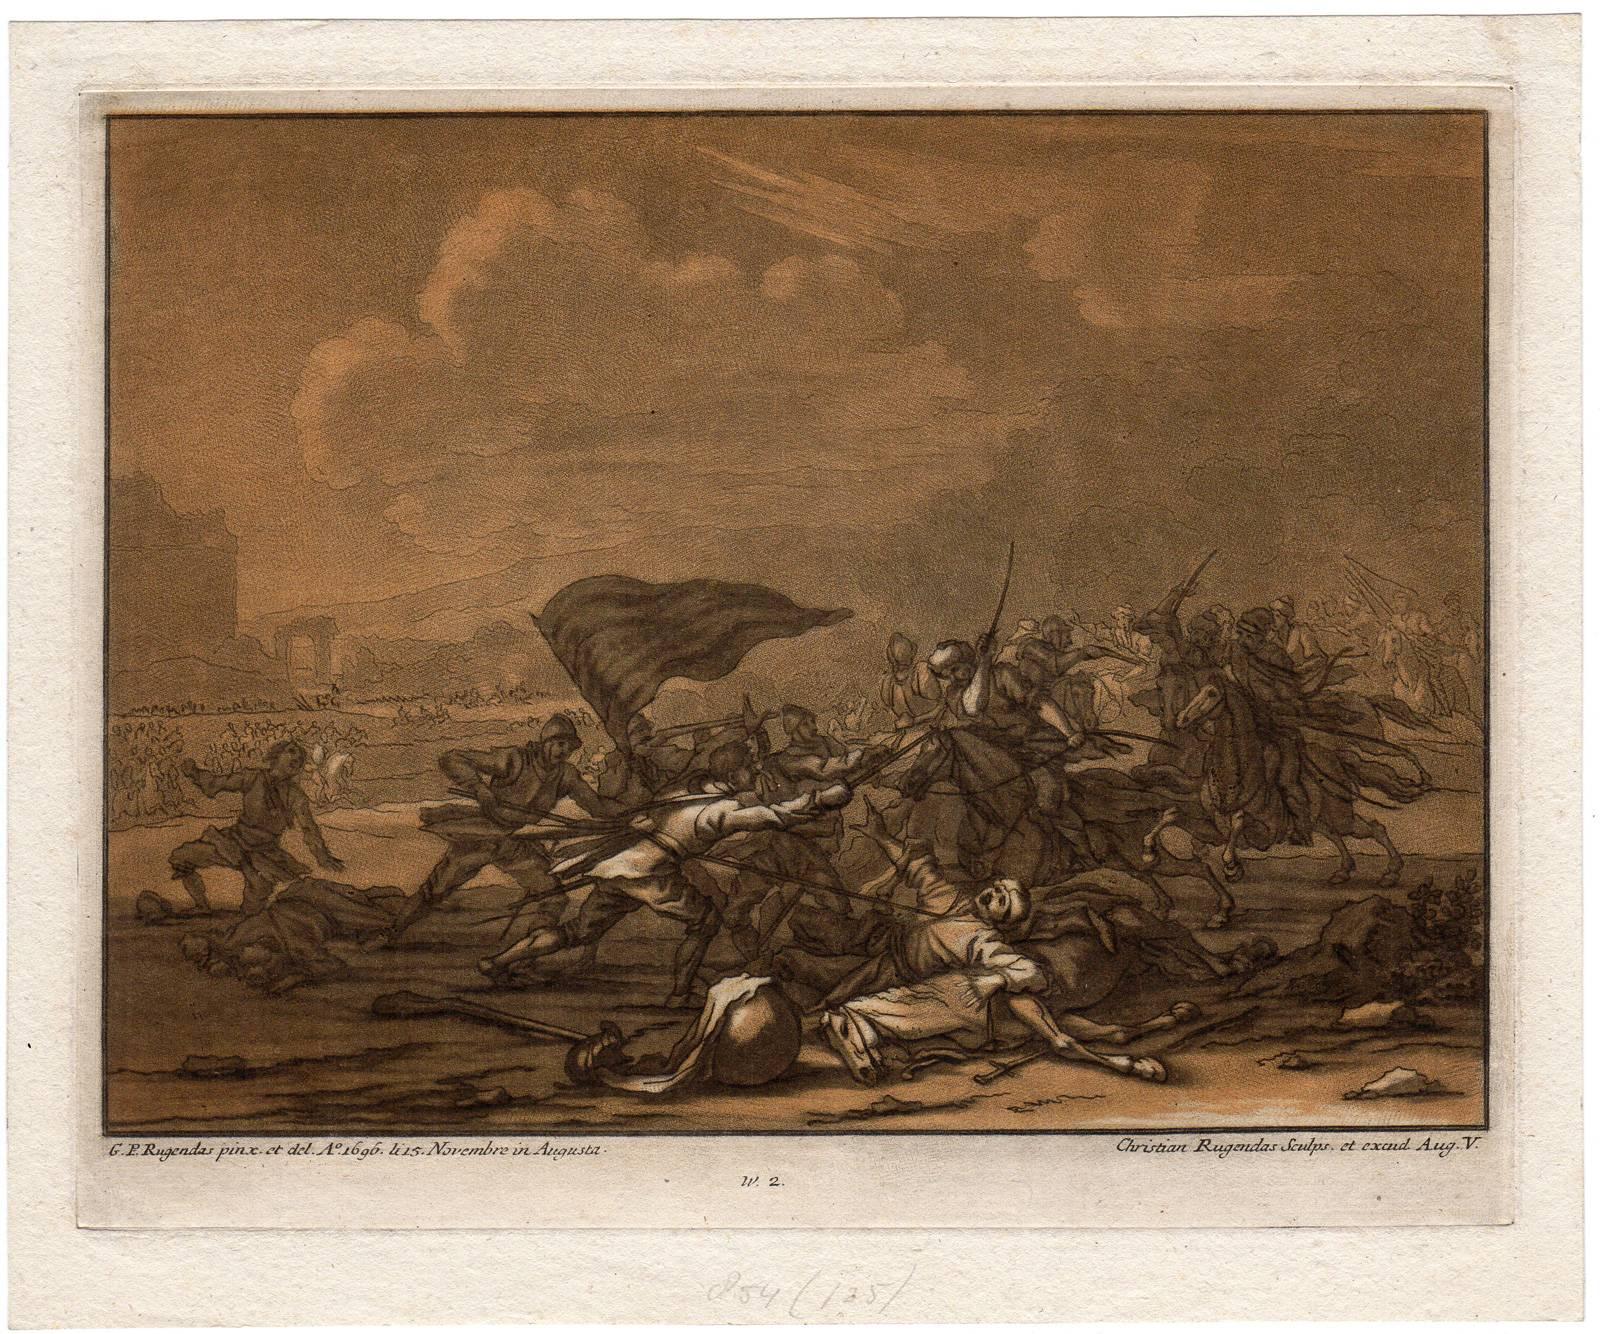 Christian Rugendas Figurative Print - Untitled - A skirmish between soldiers and cavalry.